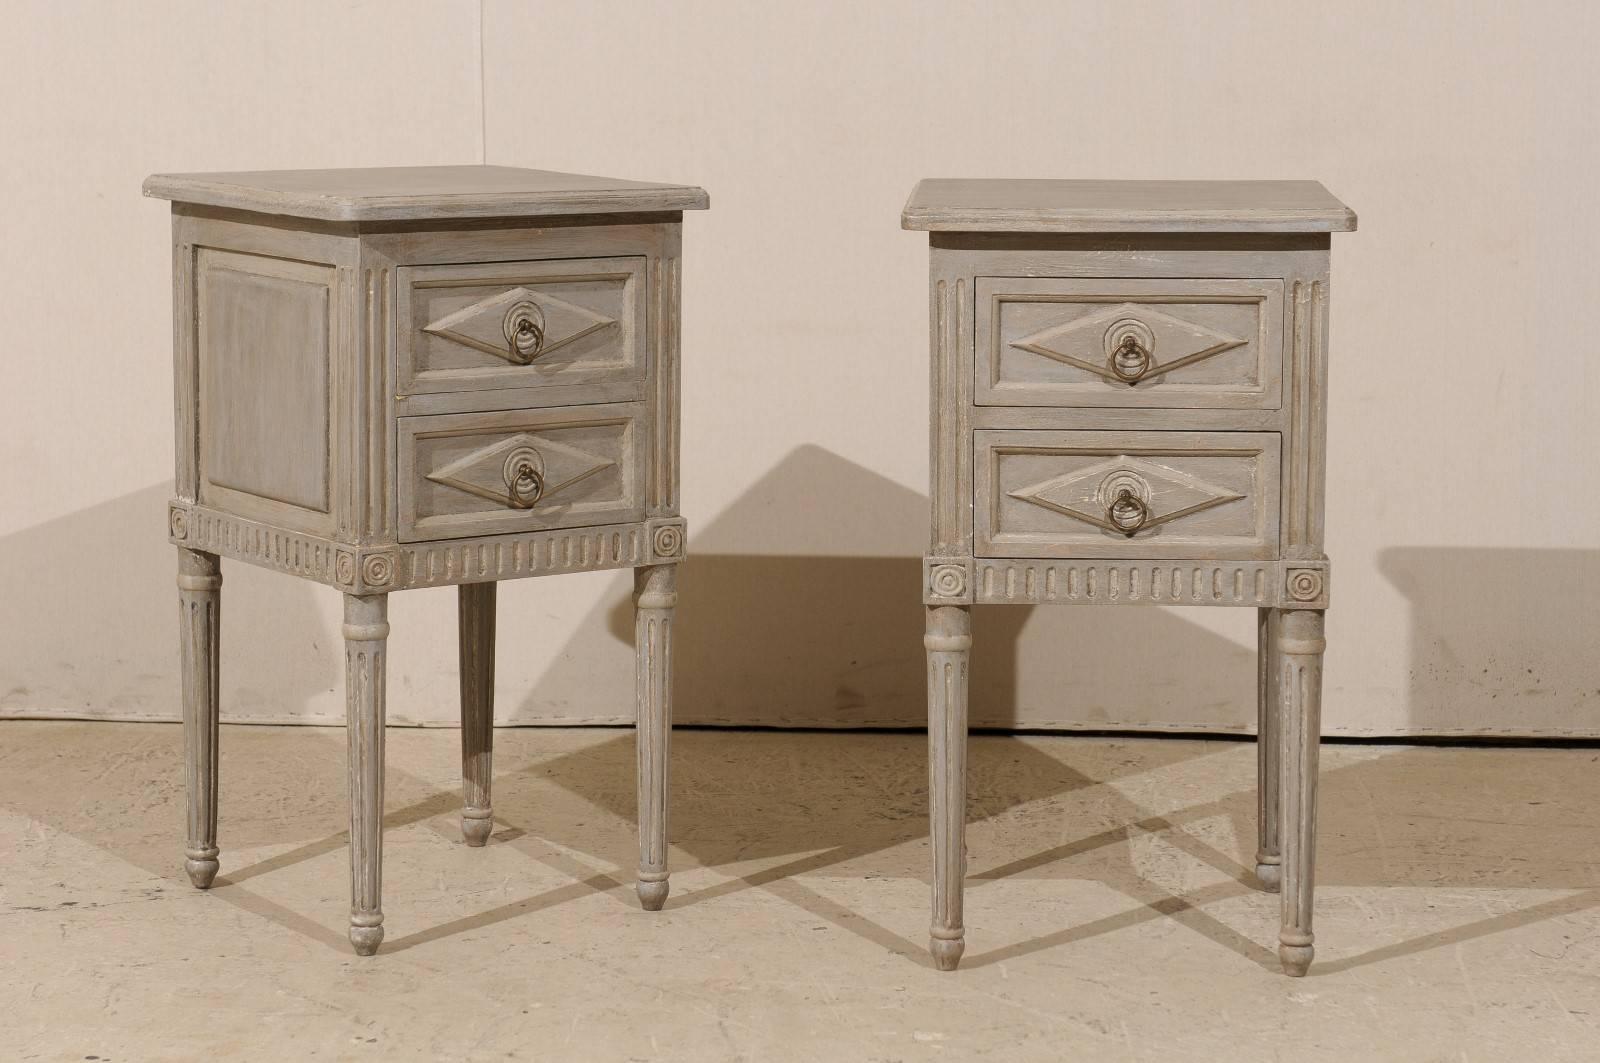 A pair of small size two-drawer painted wood nightstand tables or chests. These small size chests feature a carved horizontal diamond inset onto the drawers. The decor is elegant yet discreet, with fluted motifs flanking the drawers, as well as